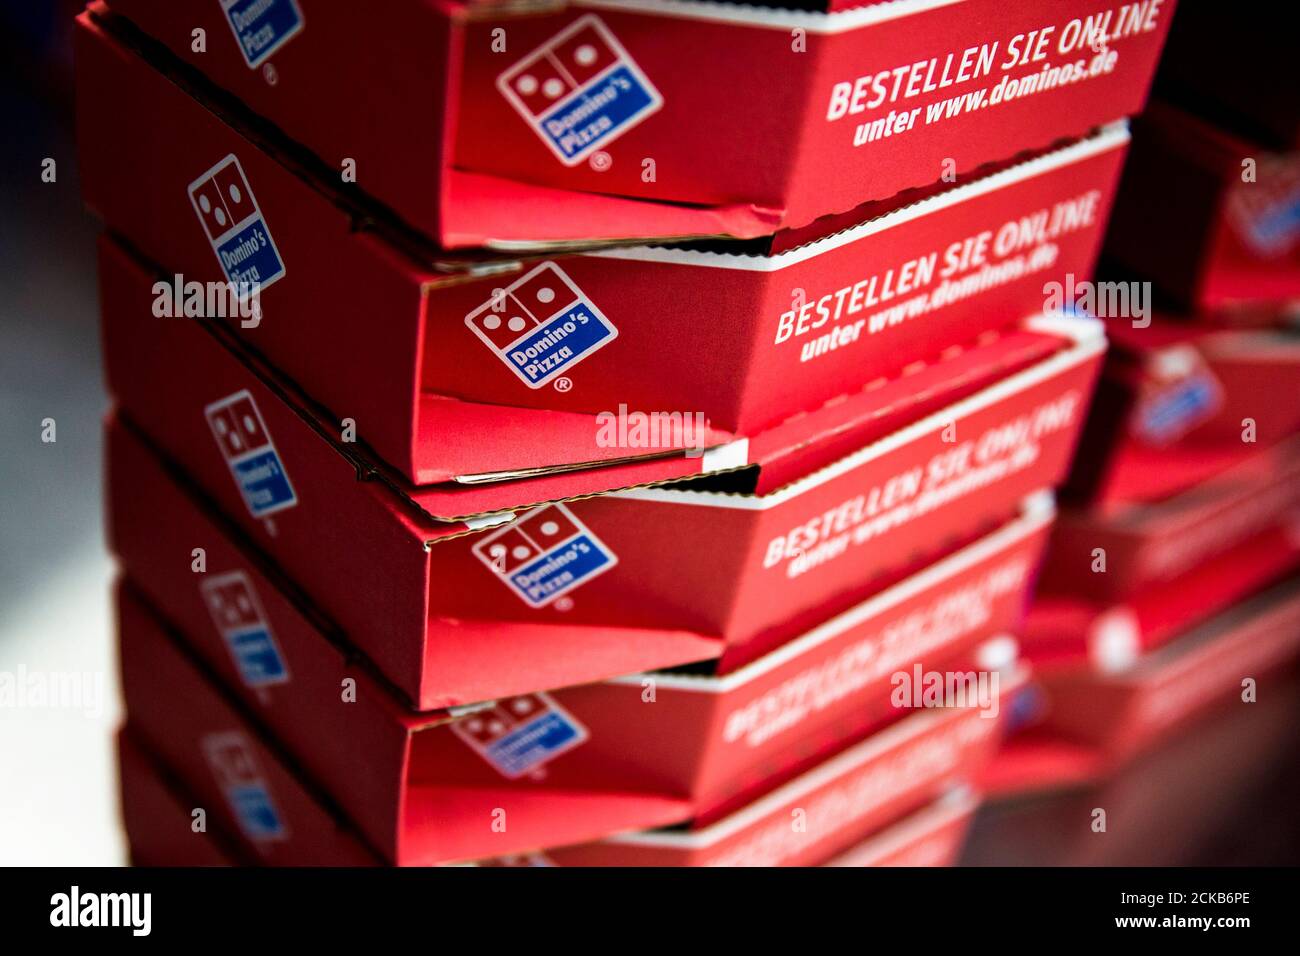 Delivery boxes for take-away pizzas are stacked at a Domino's Pizza store in August 19, 2013. Can a British food chain with U.S. sell Italian pizza to the Domino's